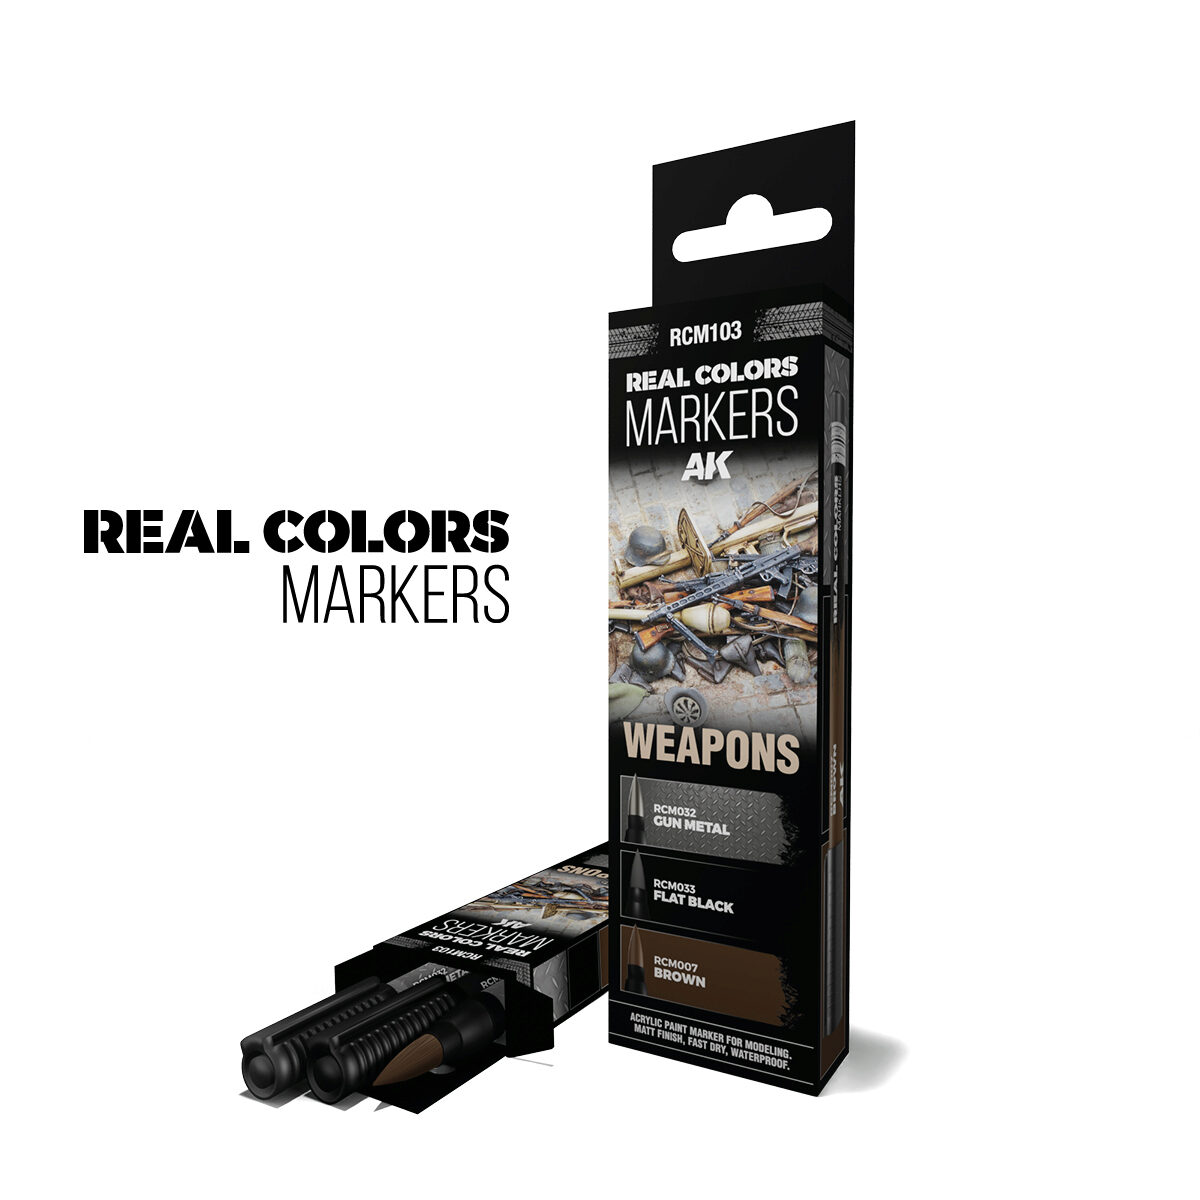 AK RCM103 WEAPONS - SET 3 REAL COLORS MARKERS